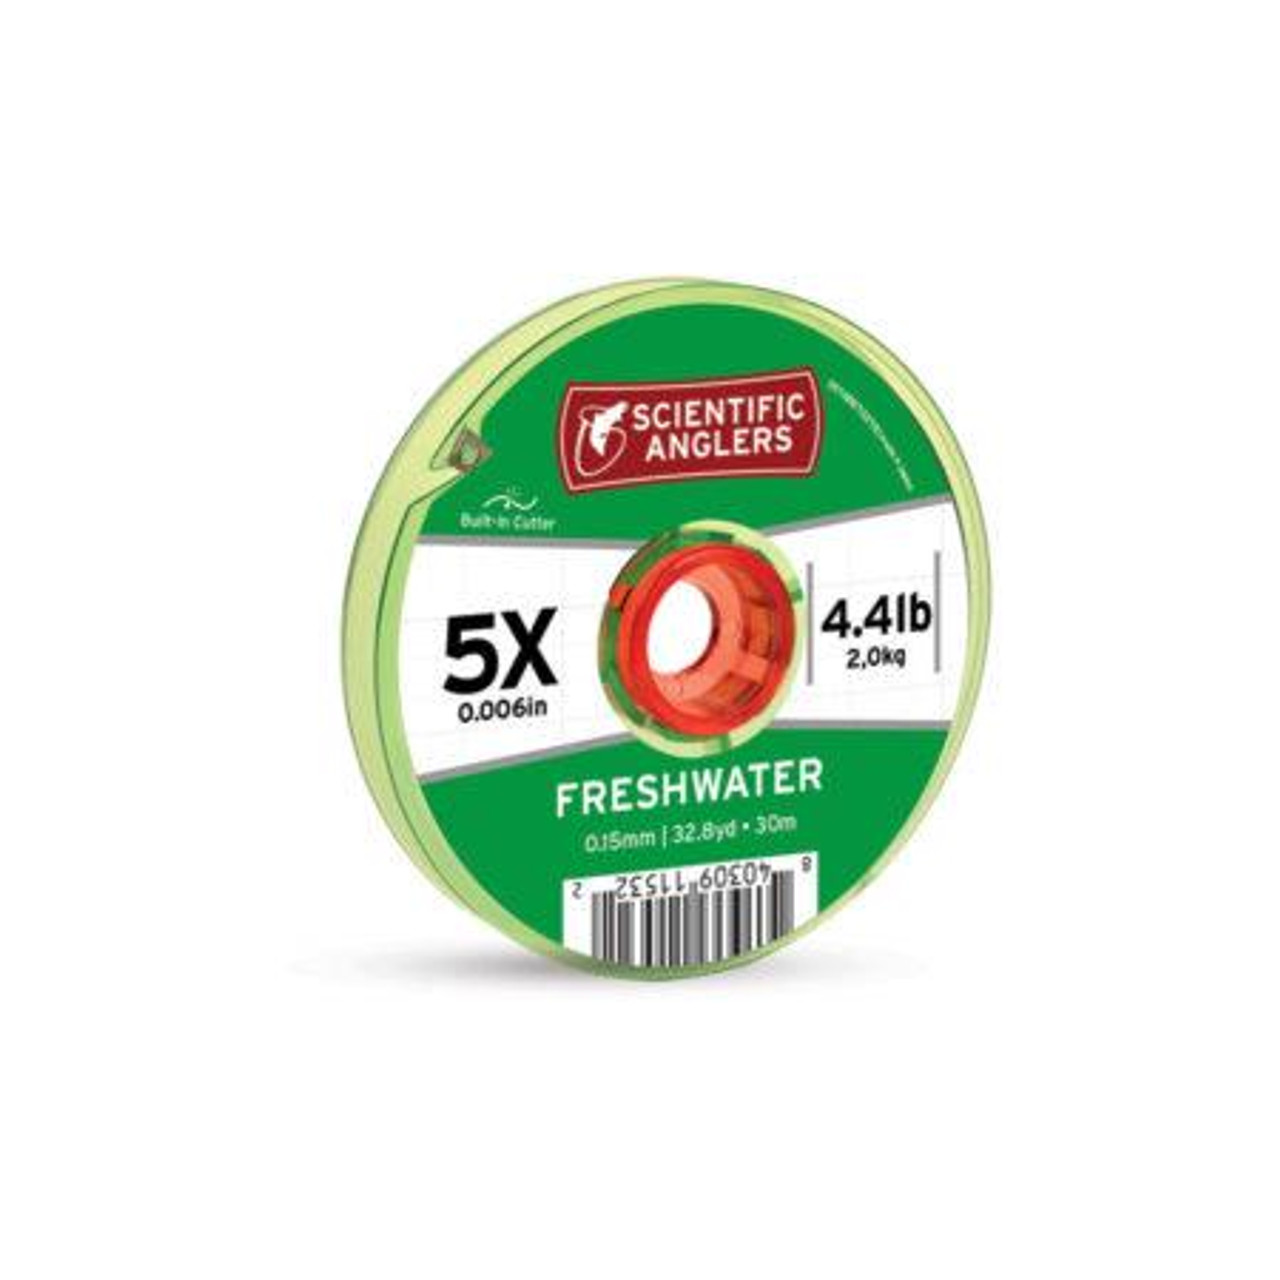 Scientific Anglers Freshwater Tippet - GameMasters Outdoors